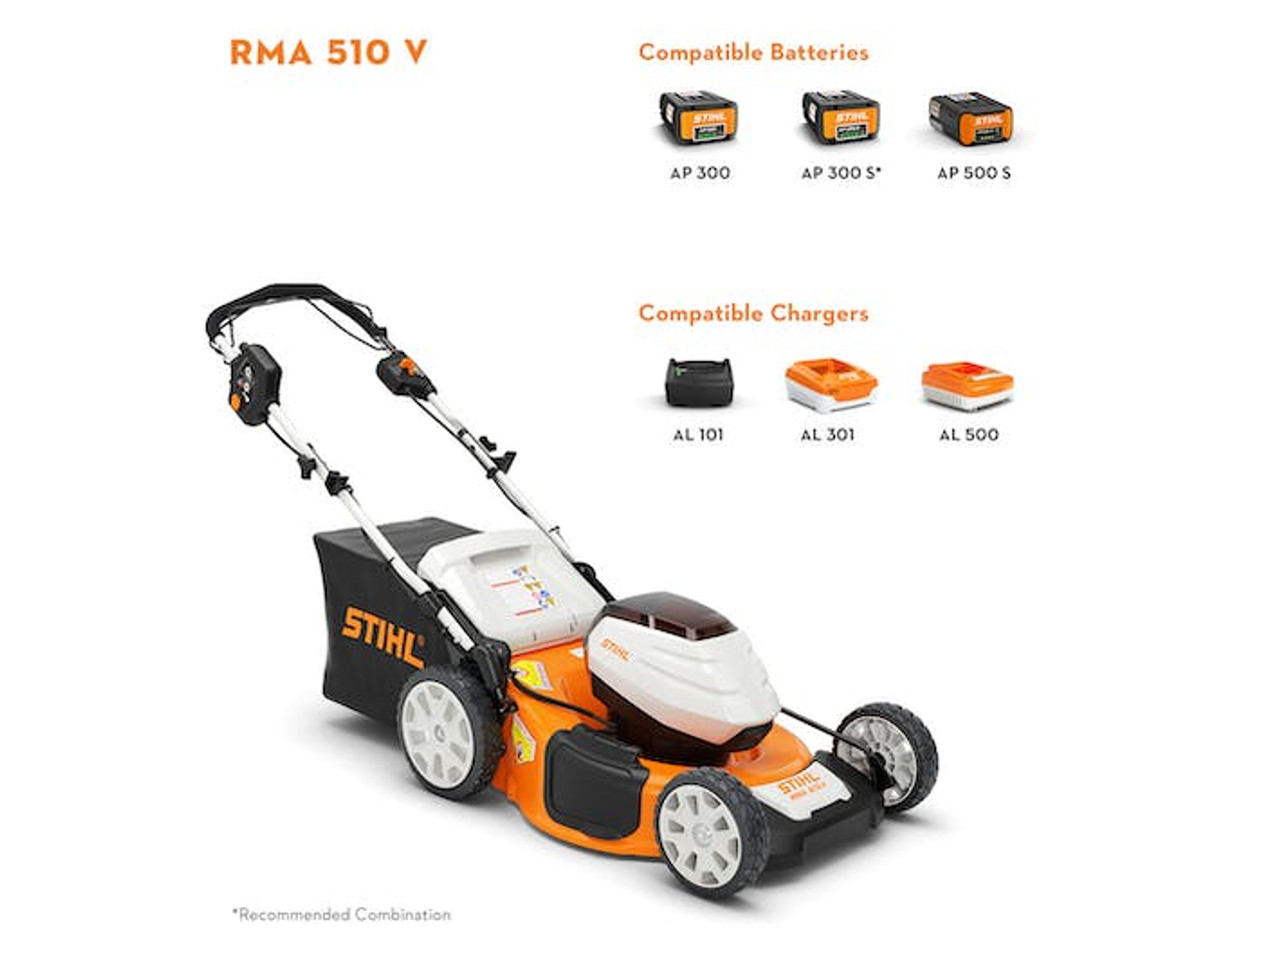 RMA 510 V - LITHIUM ION LAWN MOWER 21"SELF-PROPELLED (UNIT ONLY)